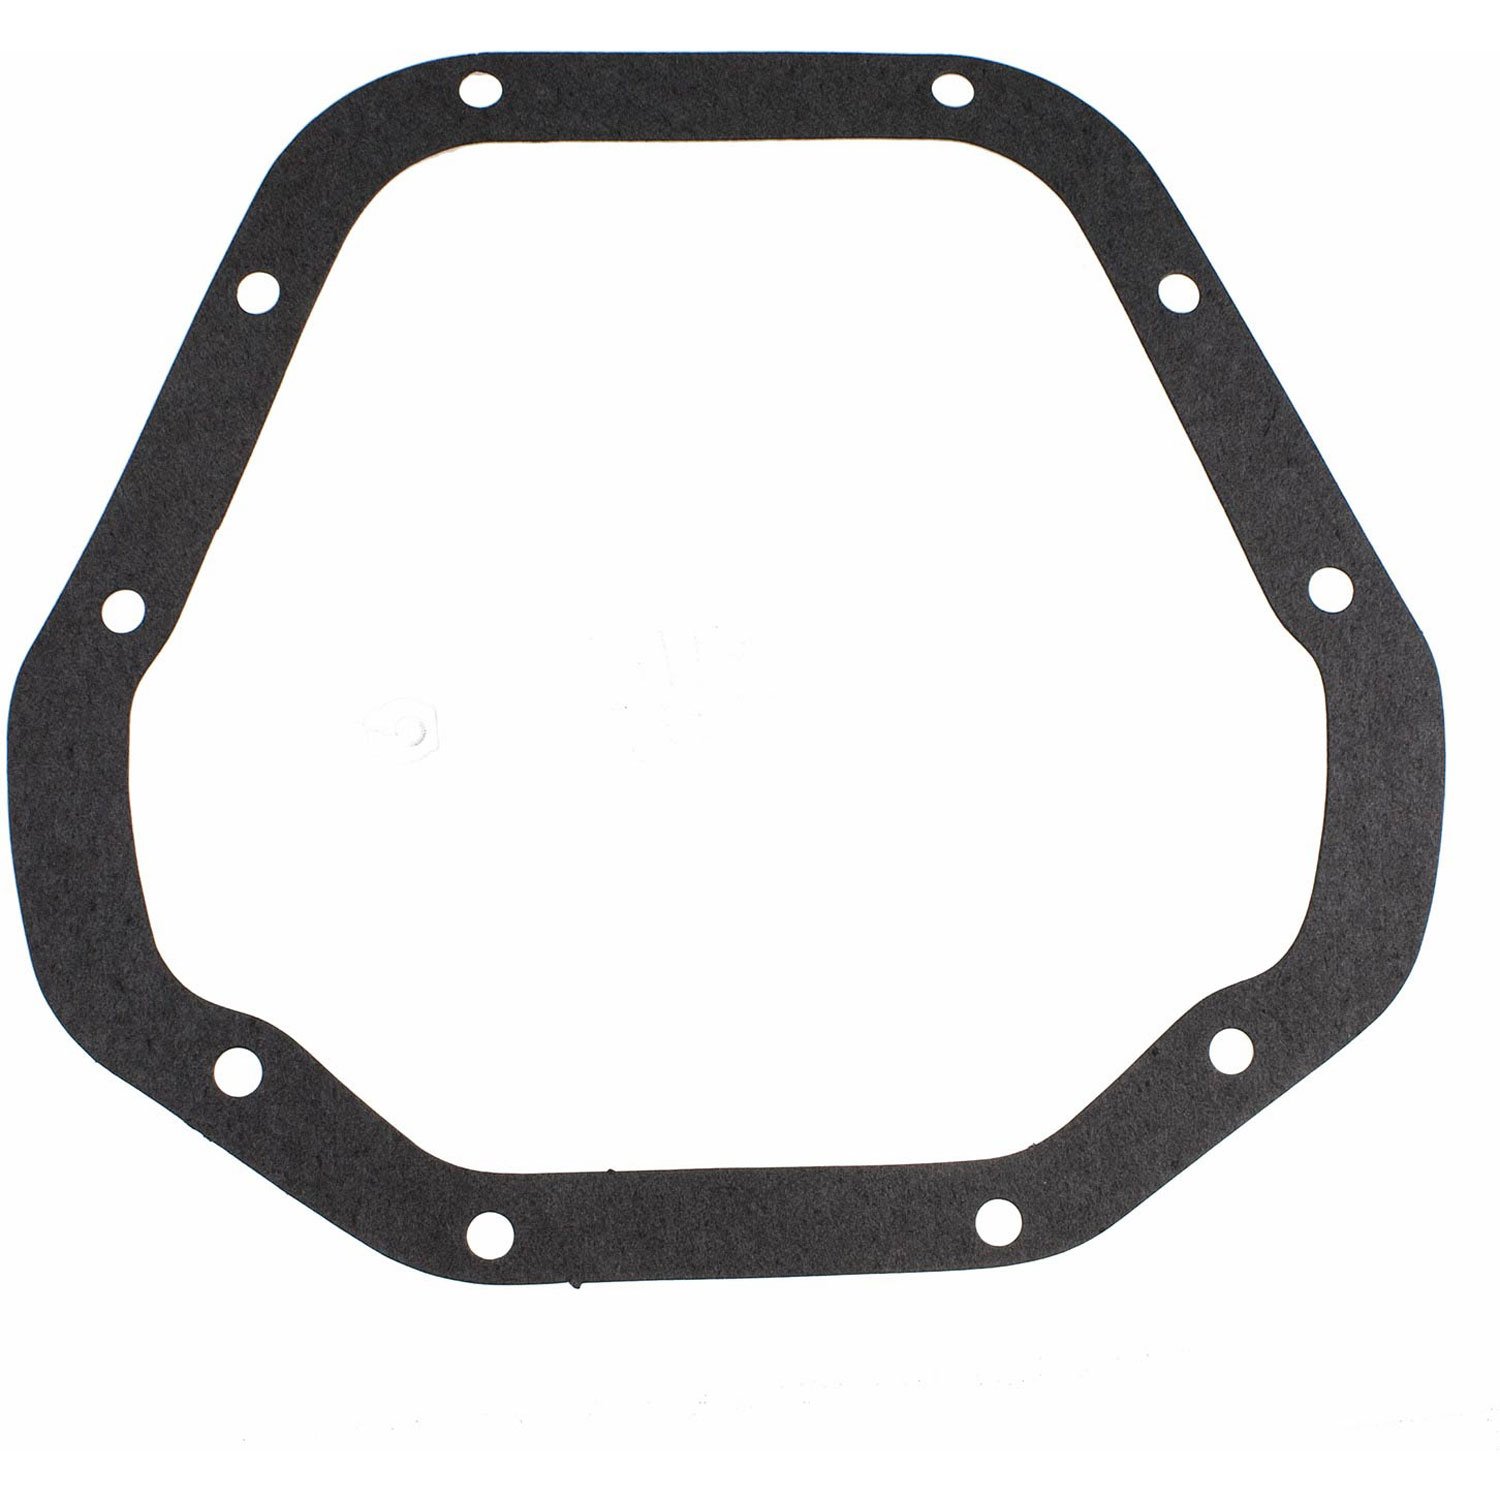 Differential Cover Gasket